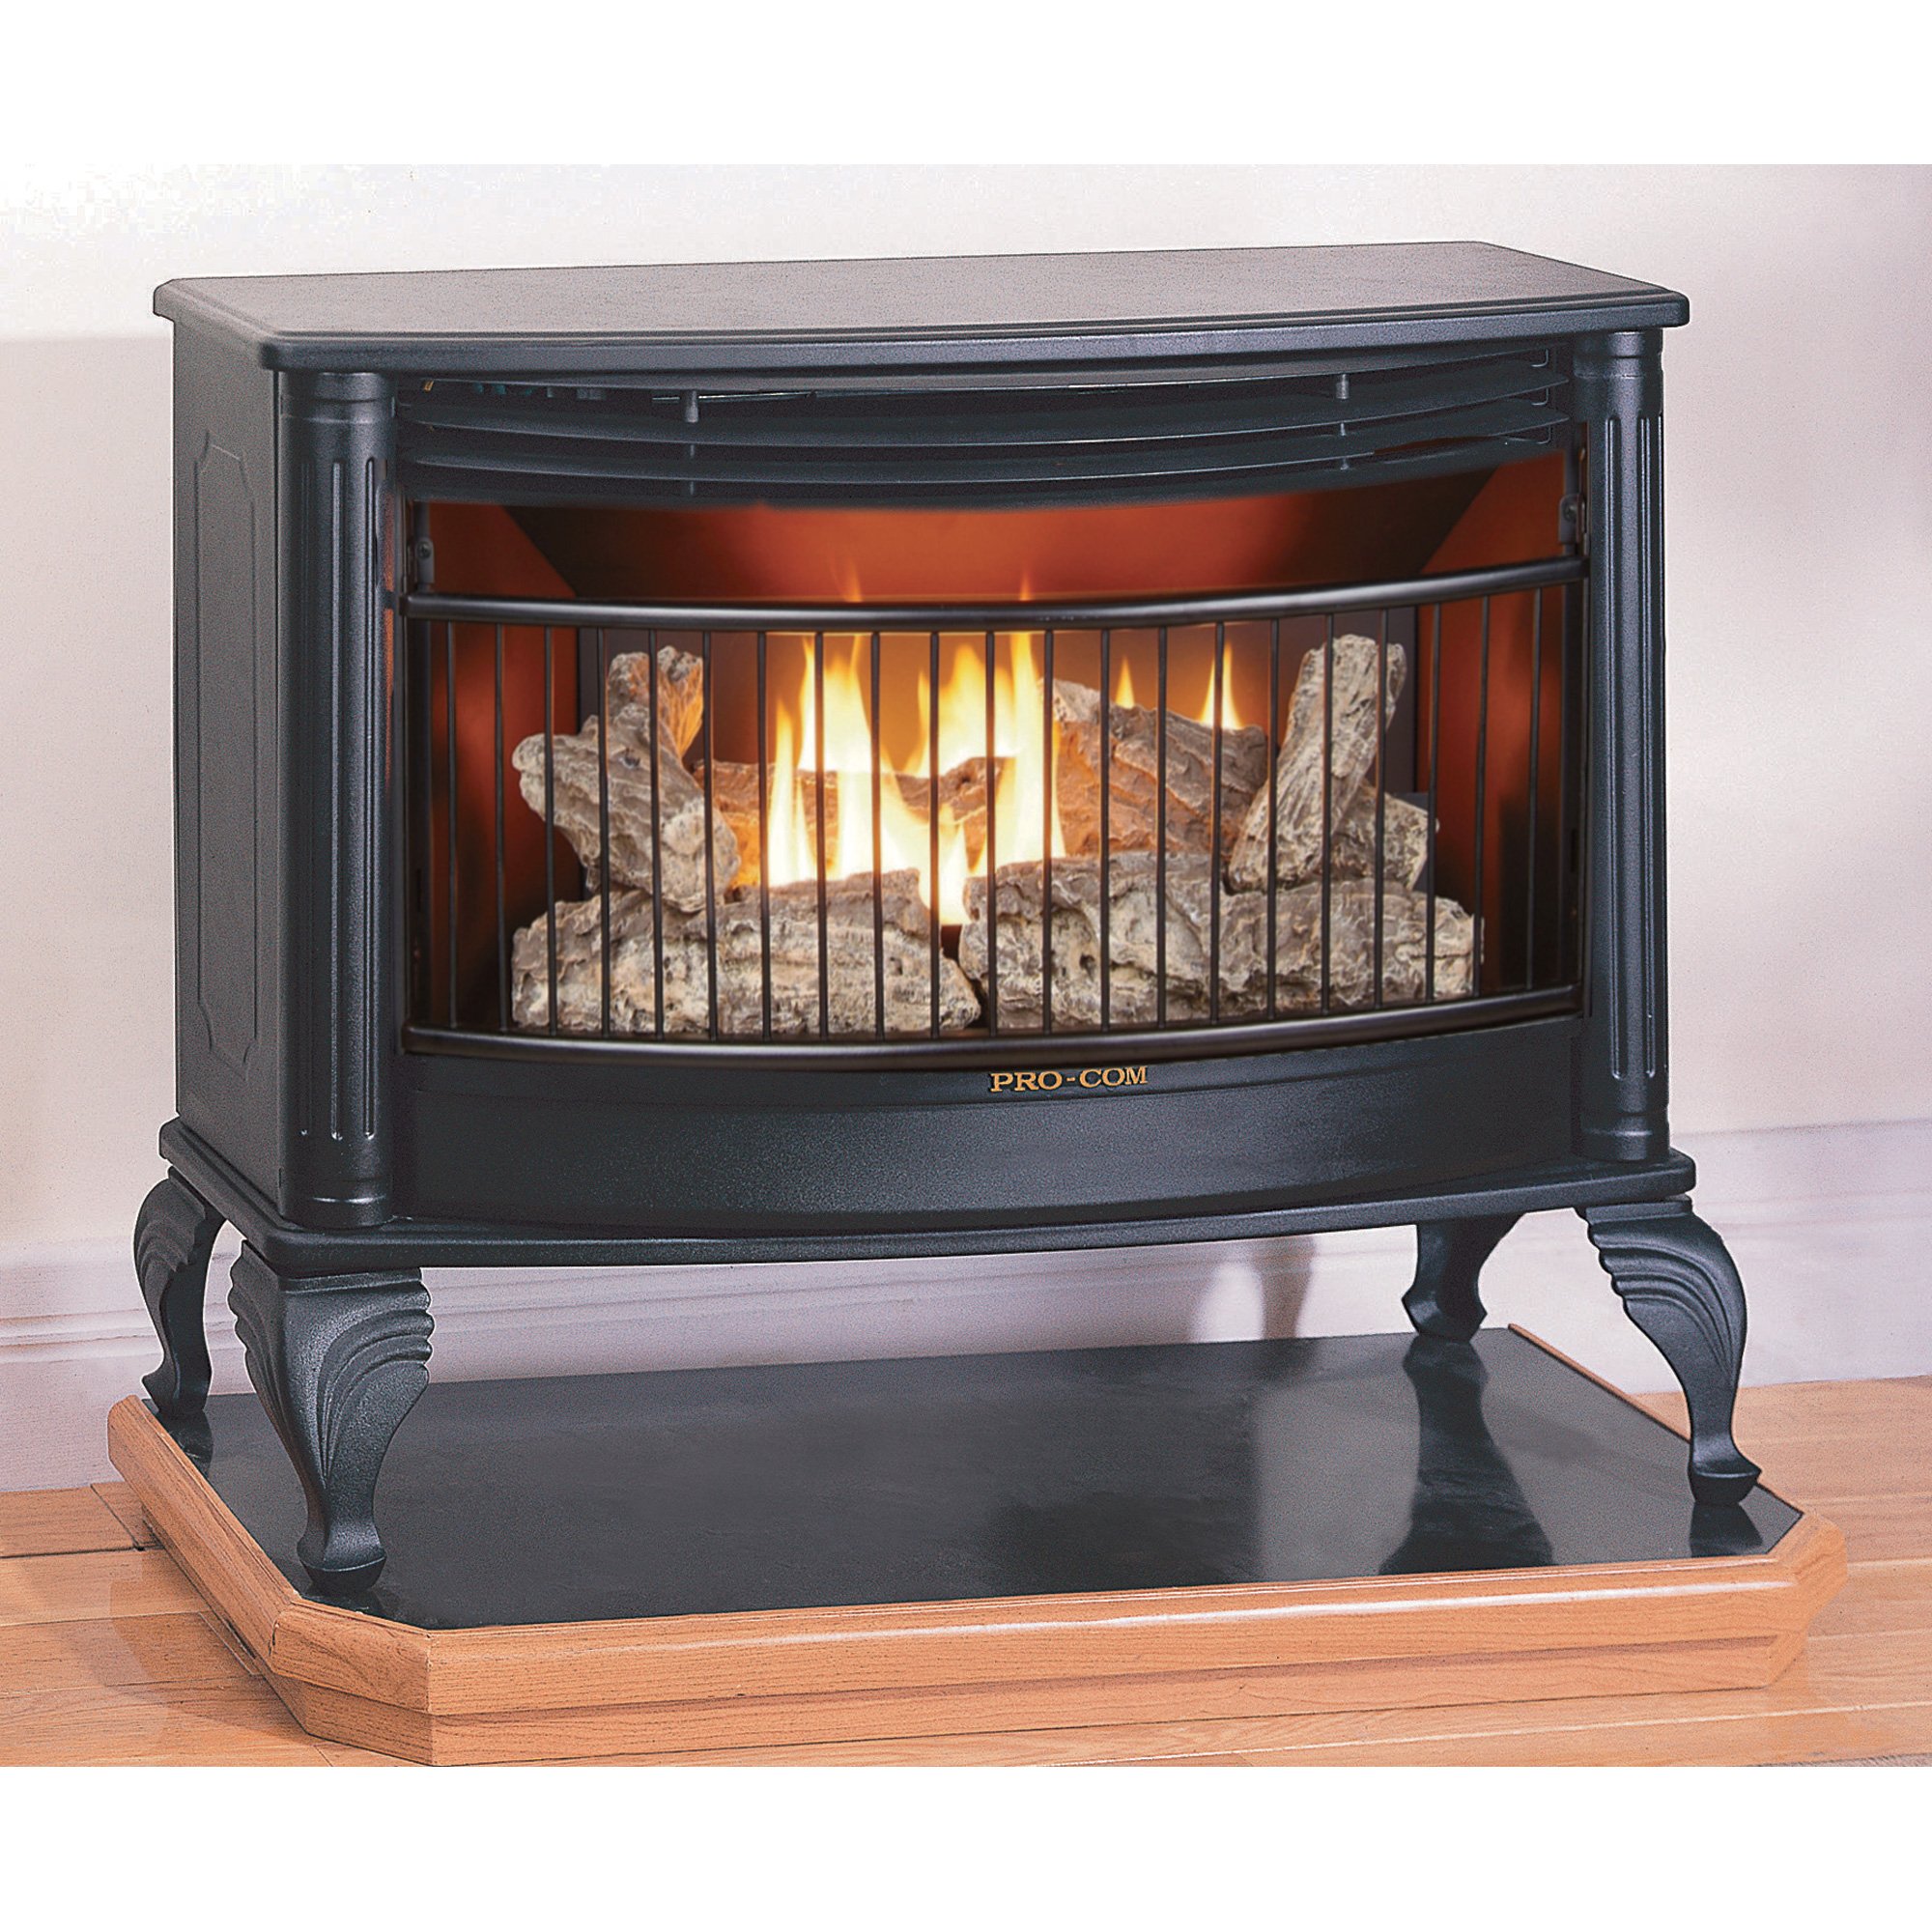 Comparing Propane Fireplaces: A Modern Alternative to Wood-Burning.